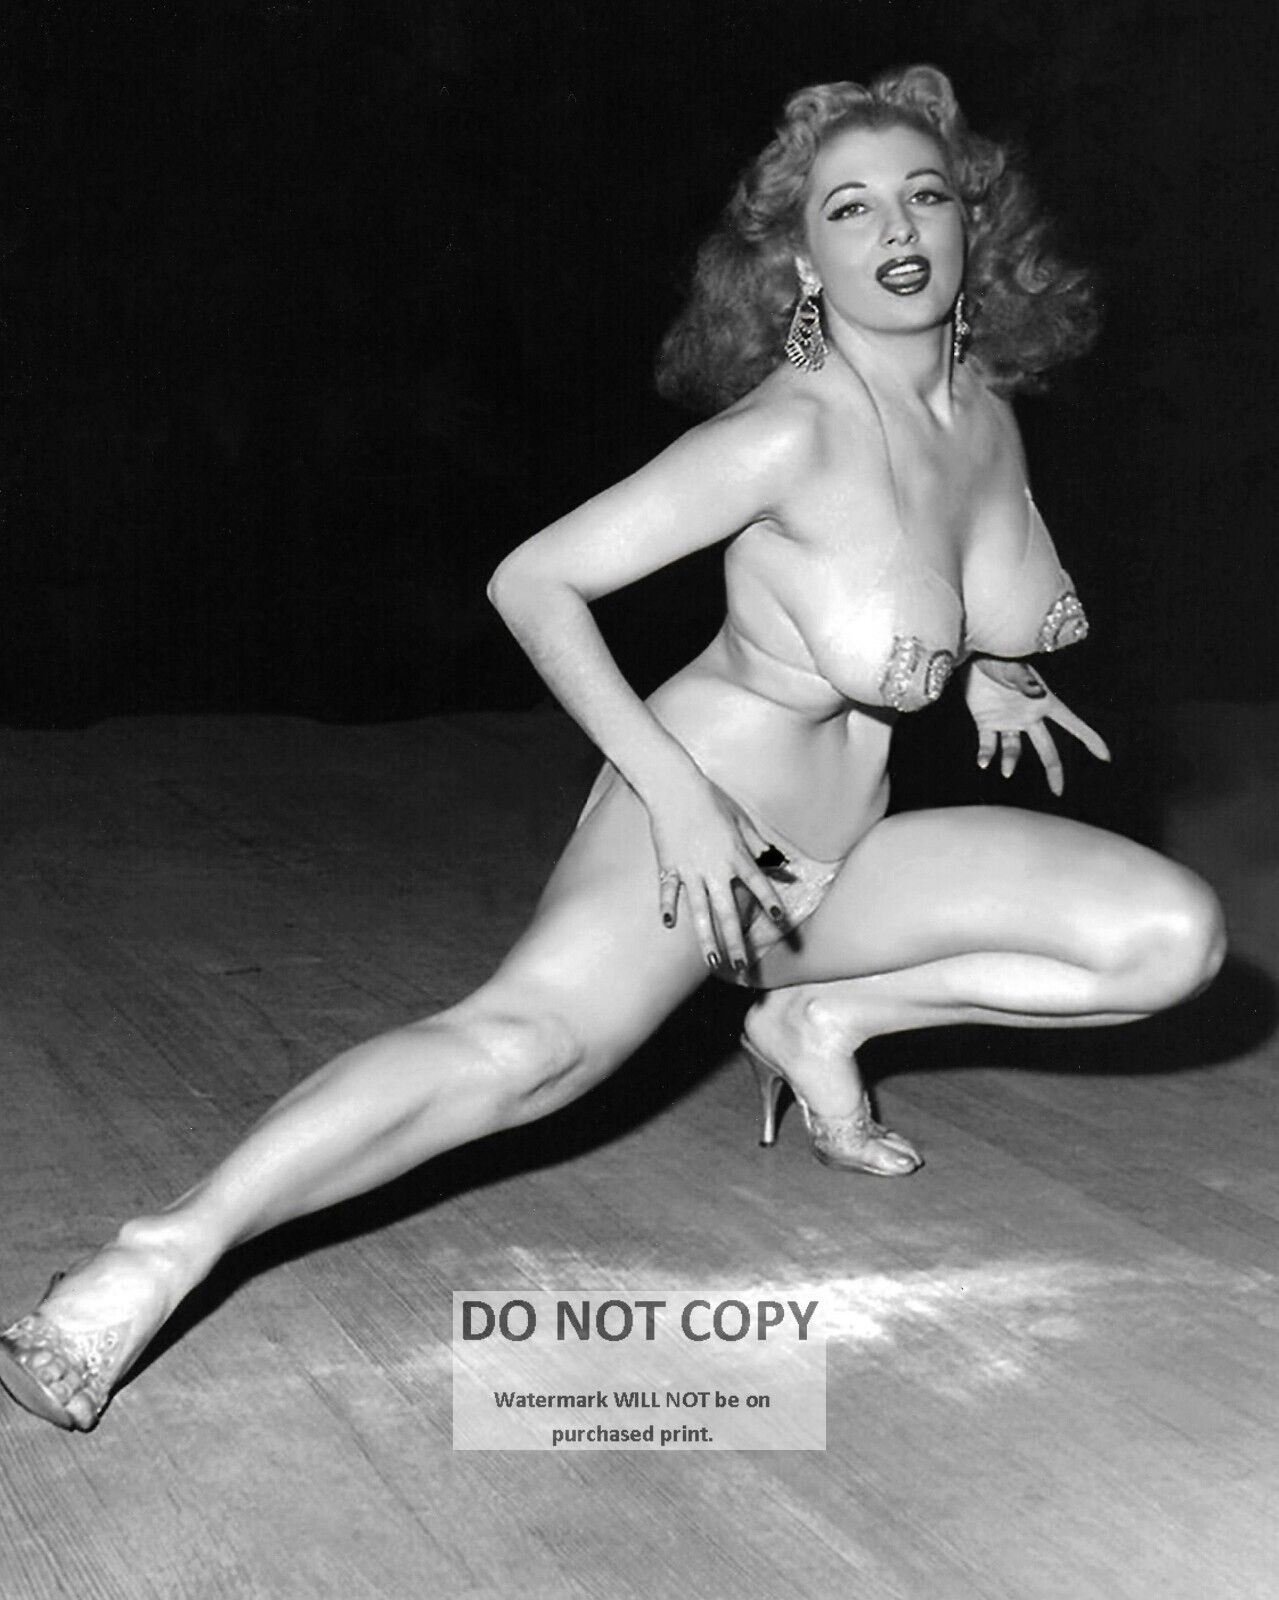 TEMPEST STORM ACTRESS AND BURLESQUE PERFORMER- 8X10 PUBLICITY PHOTO (MW051)